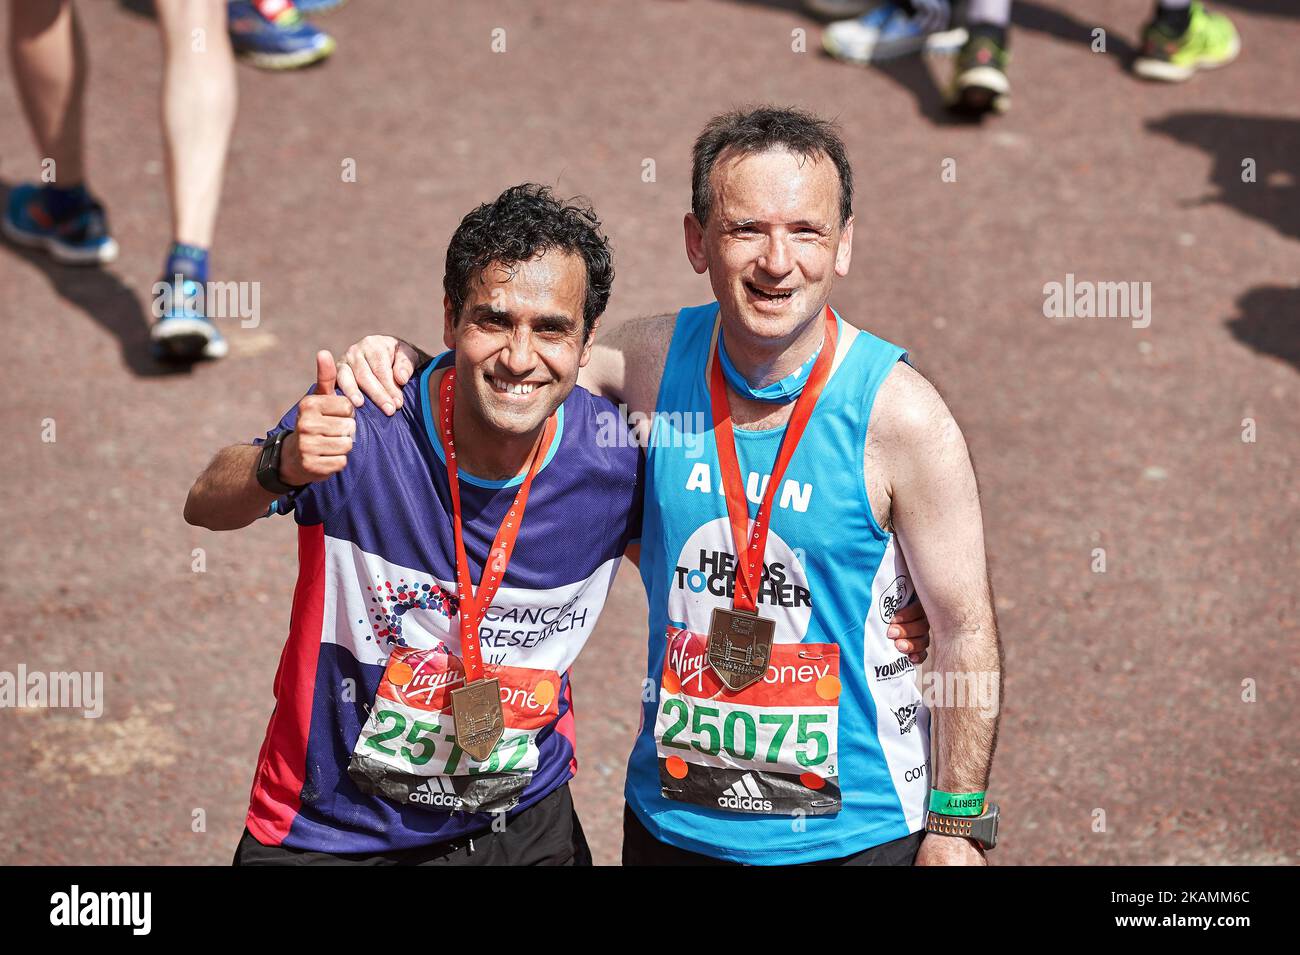 Over 40,000 people ranging from Athletes to non athletes to celebrities took part in the London Marathon which started at Blackheath and finished at St James's park Malborough road, April 23rd 2017. (Photo by Karyn Louise/NurPhoto) *** Please Use Credit from Credit Field *** Stock Photo